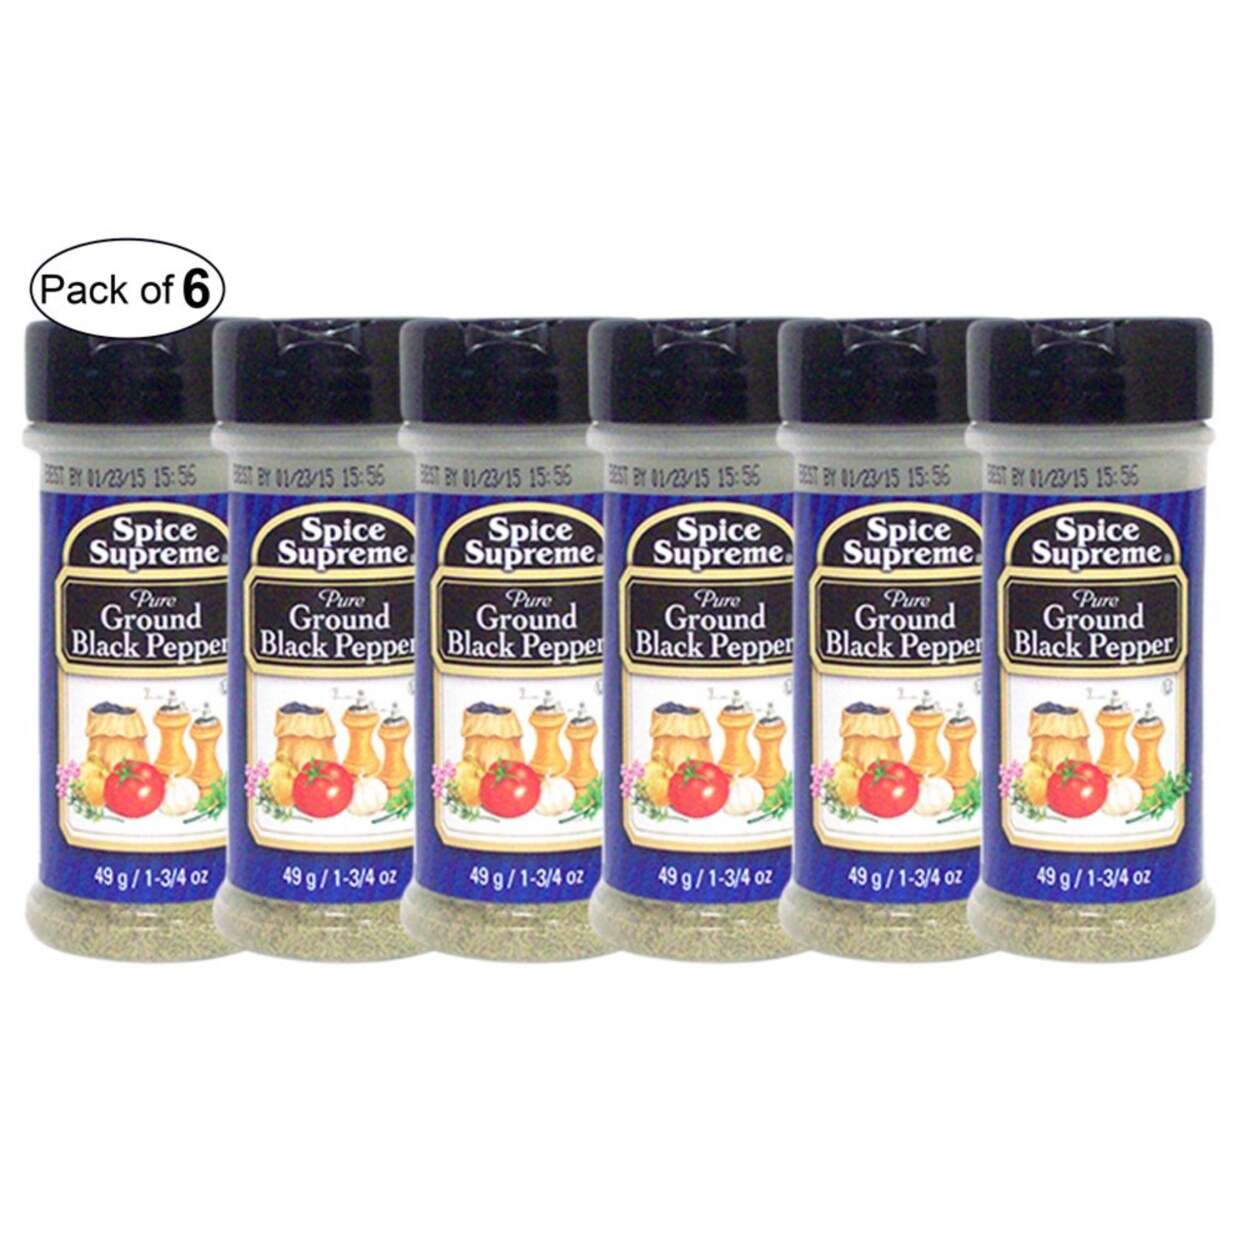 Spice Supreme - Pure Ground Black Pepper (49g) (Pack of 6)